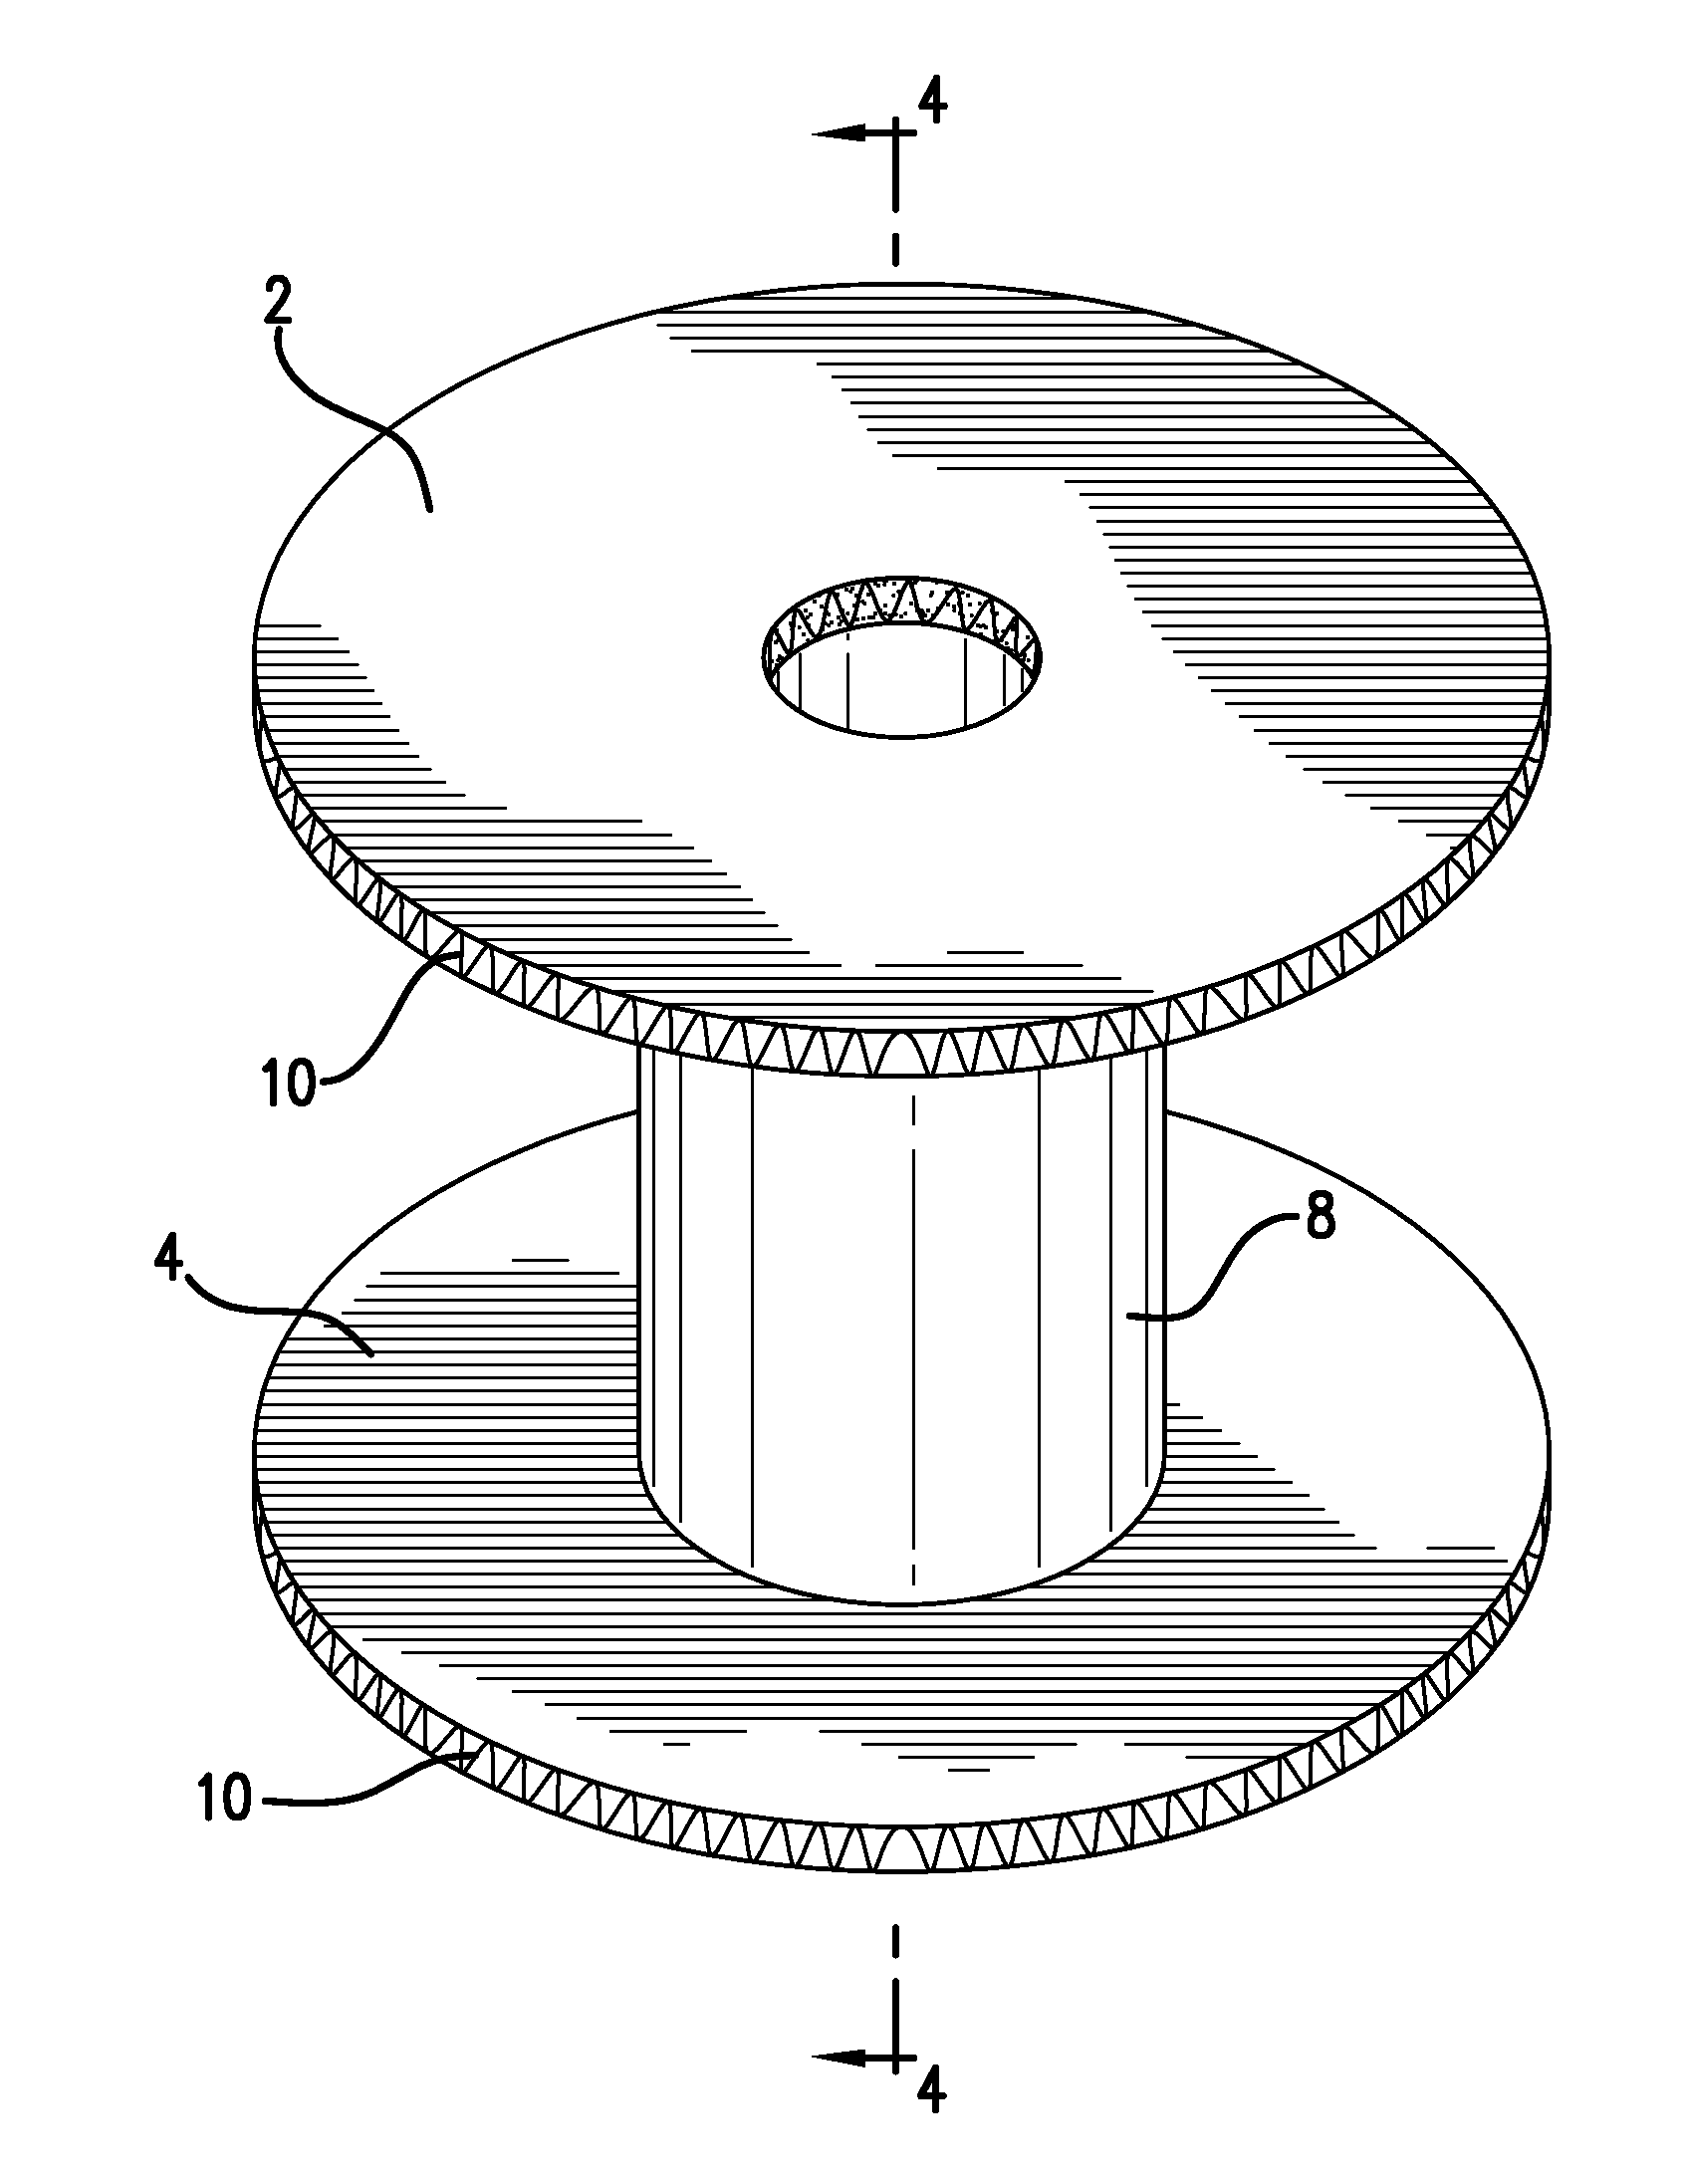 Packaging devices and methods of producing same